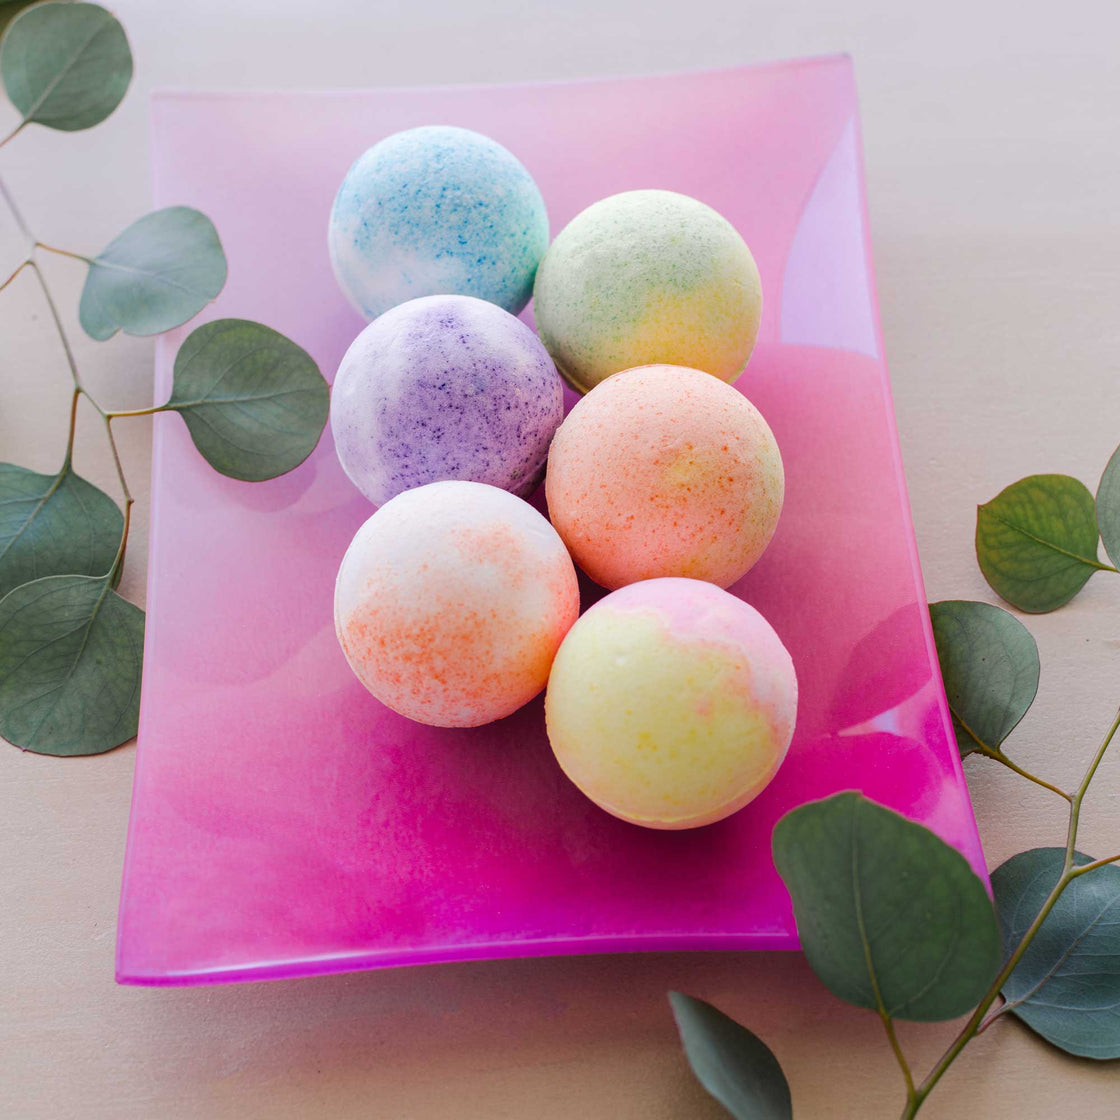 rengora's large fragrant 4oz bath bombs (6) on beautiful pink glass plate with eucalyptus leaves